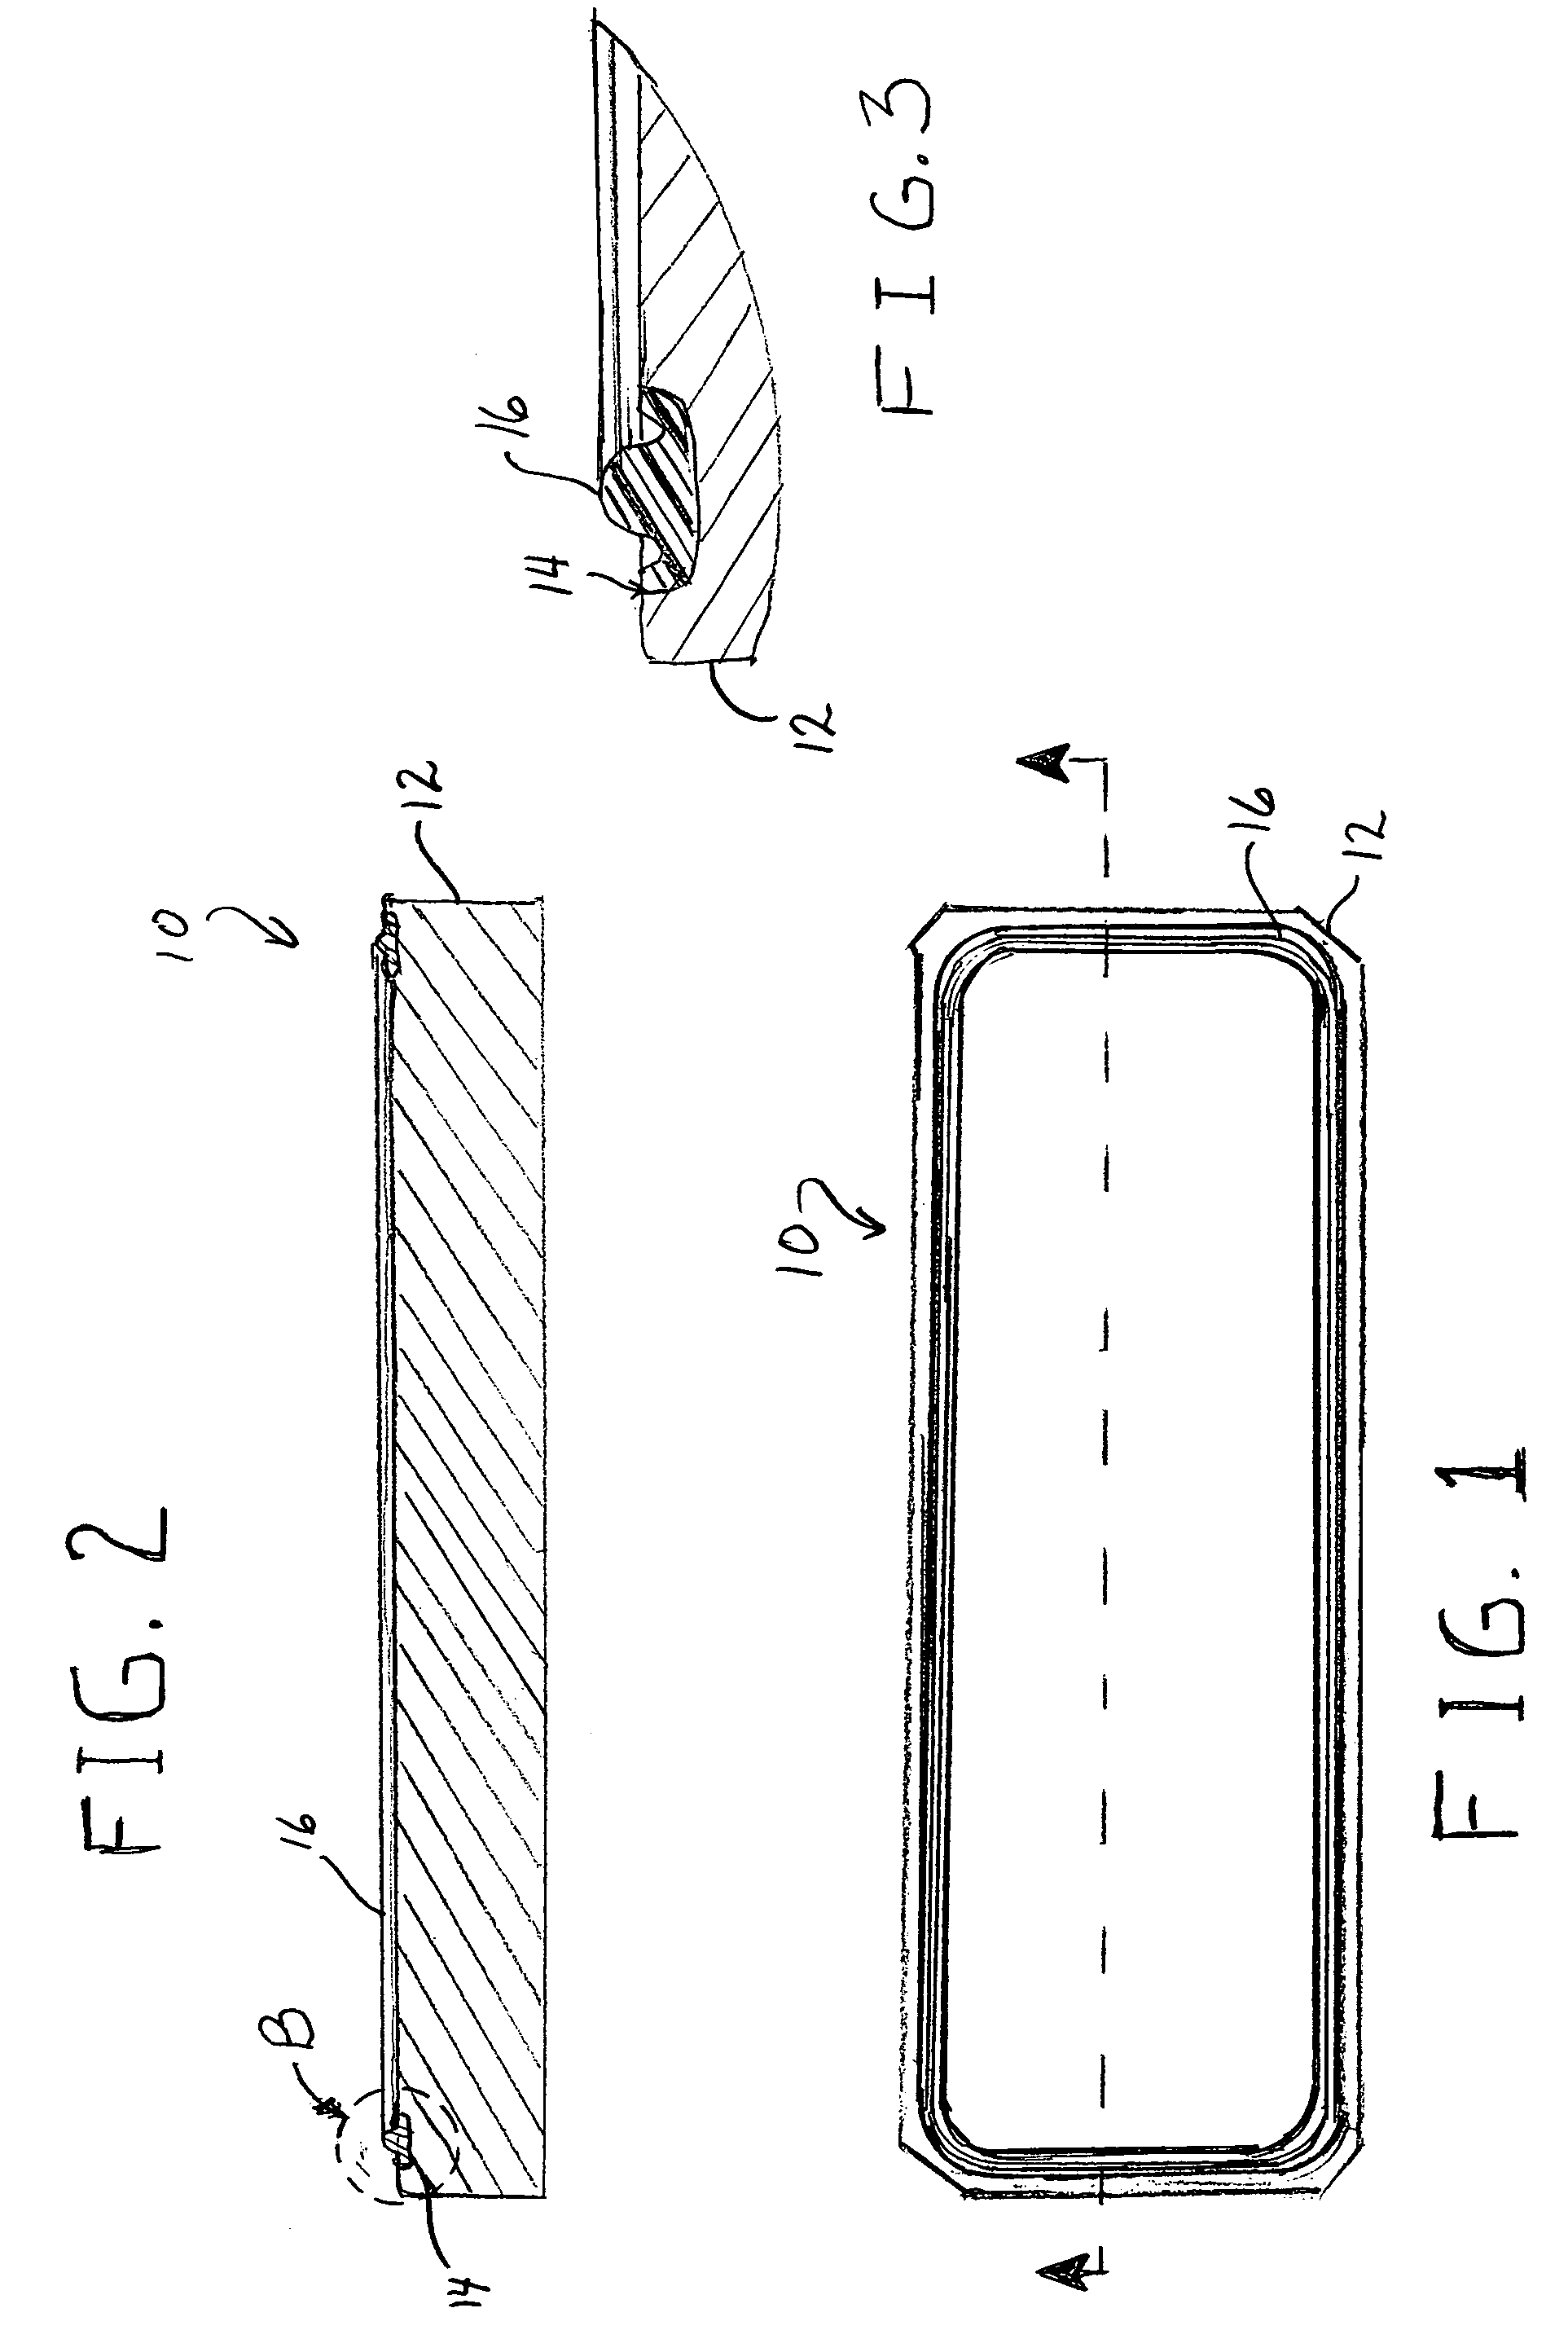 Fast curing fluoroelastomeric compositions, adhesive fluoroelastomeric compositions and methods for bonding fluoroelastomeric compositions